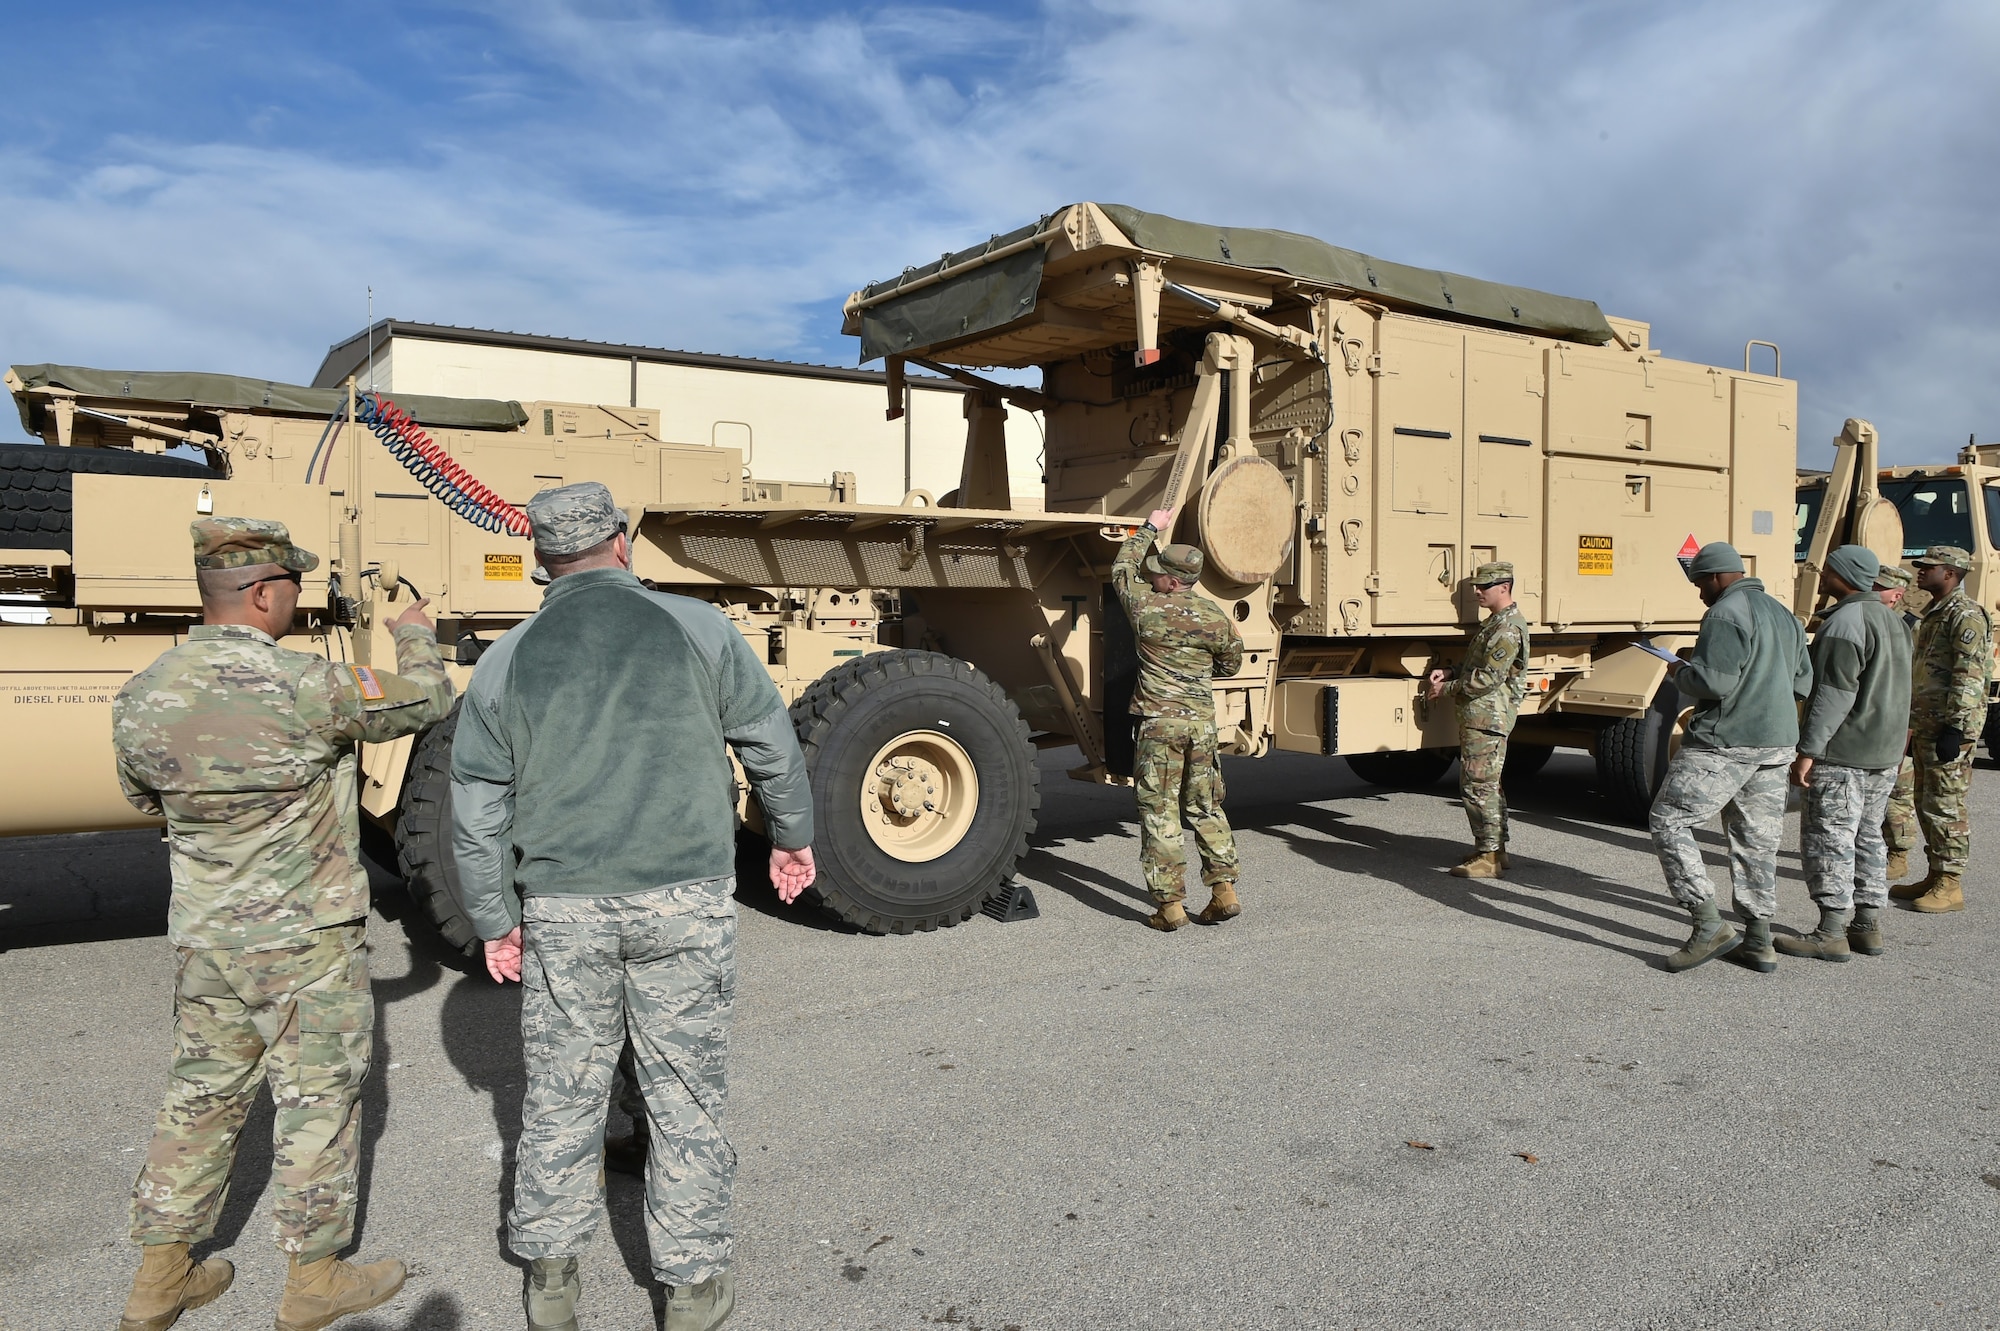 Members of the 97th Air Mobility Wing and the 4th Battalion, 3rd Air Defense Artillery Regiment inspect a vehicle during an exercise